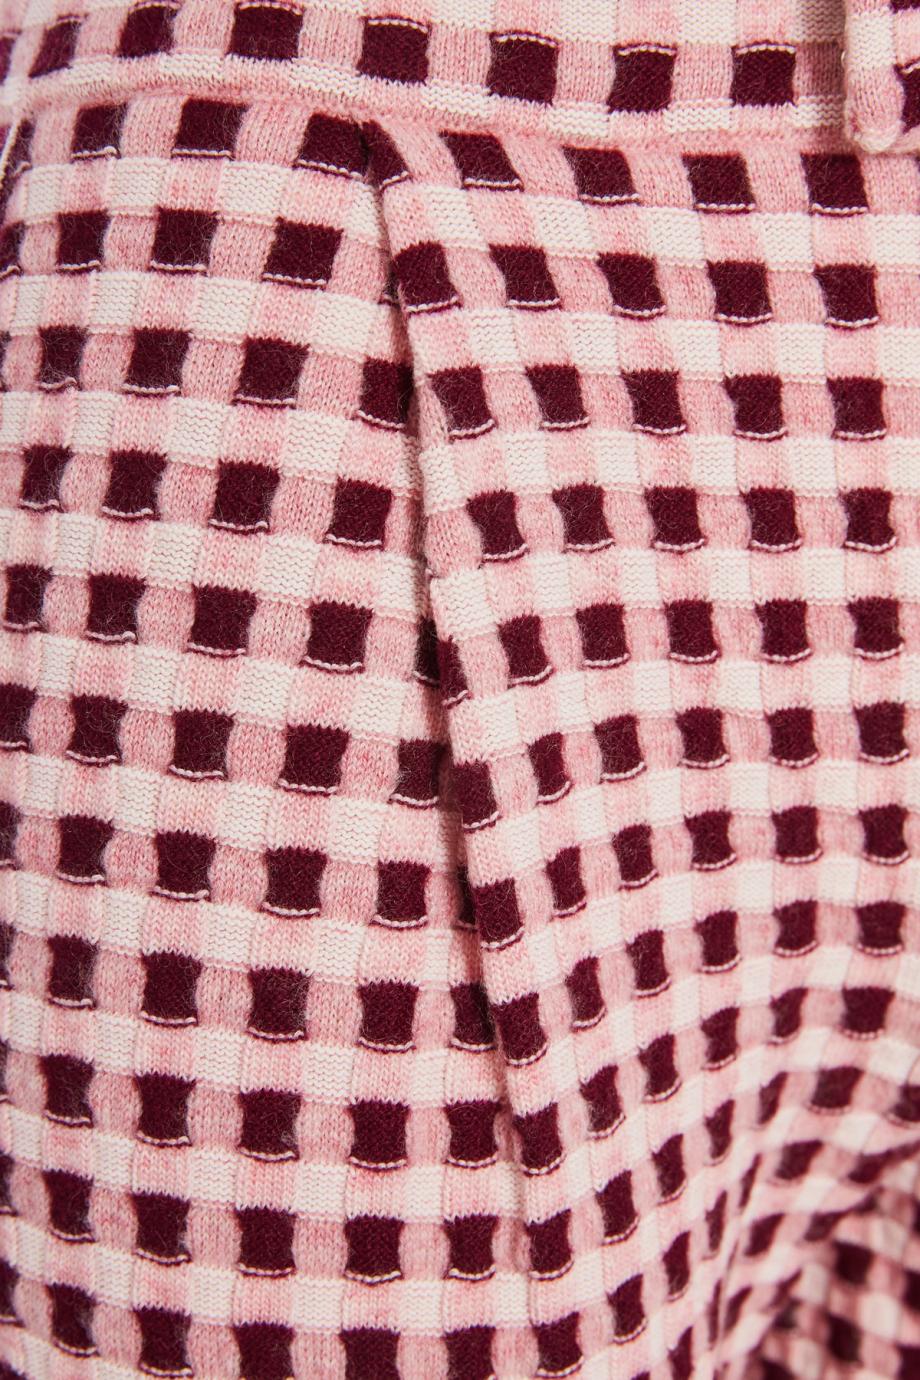 Gingham cashmere and cotton pants 